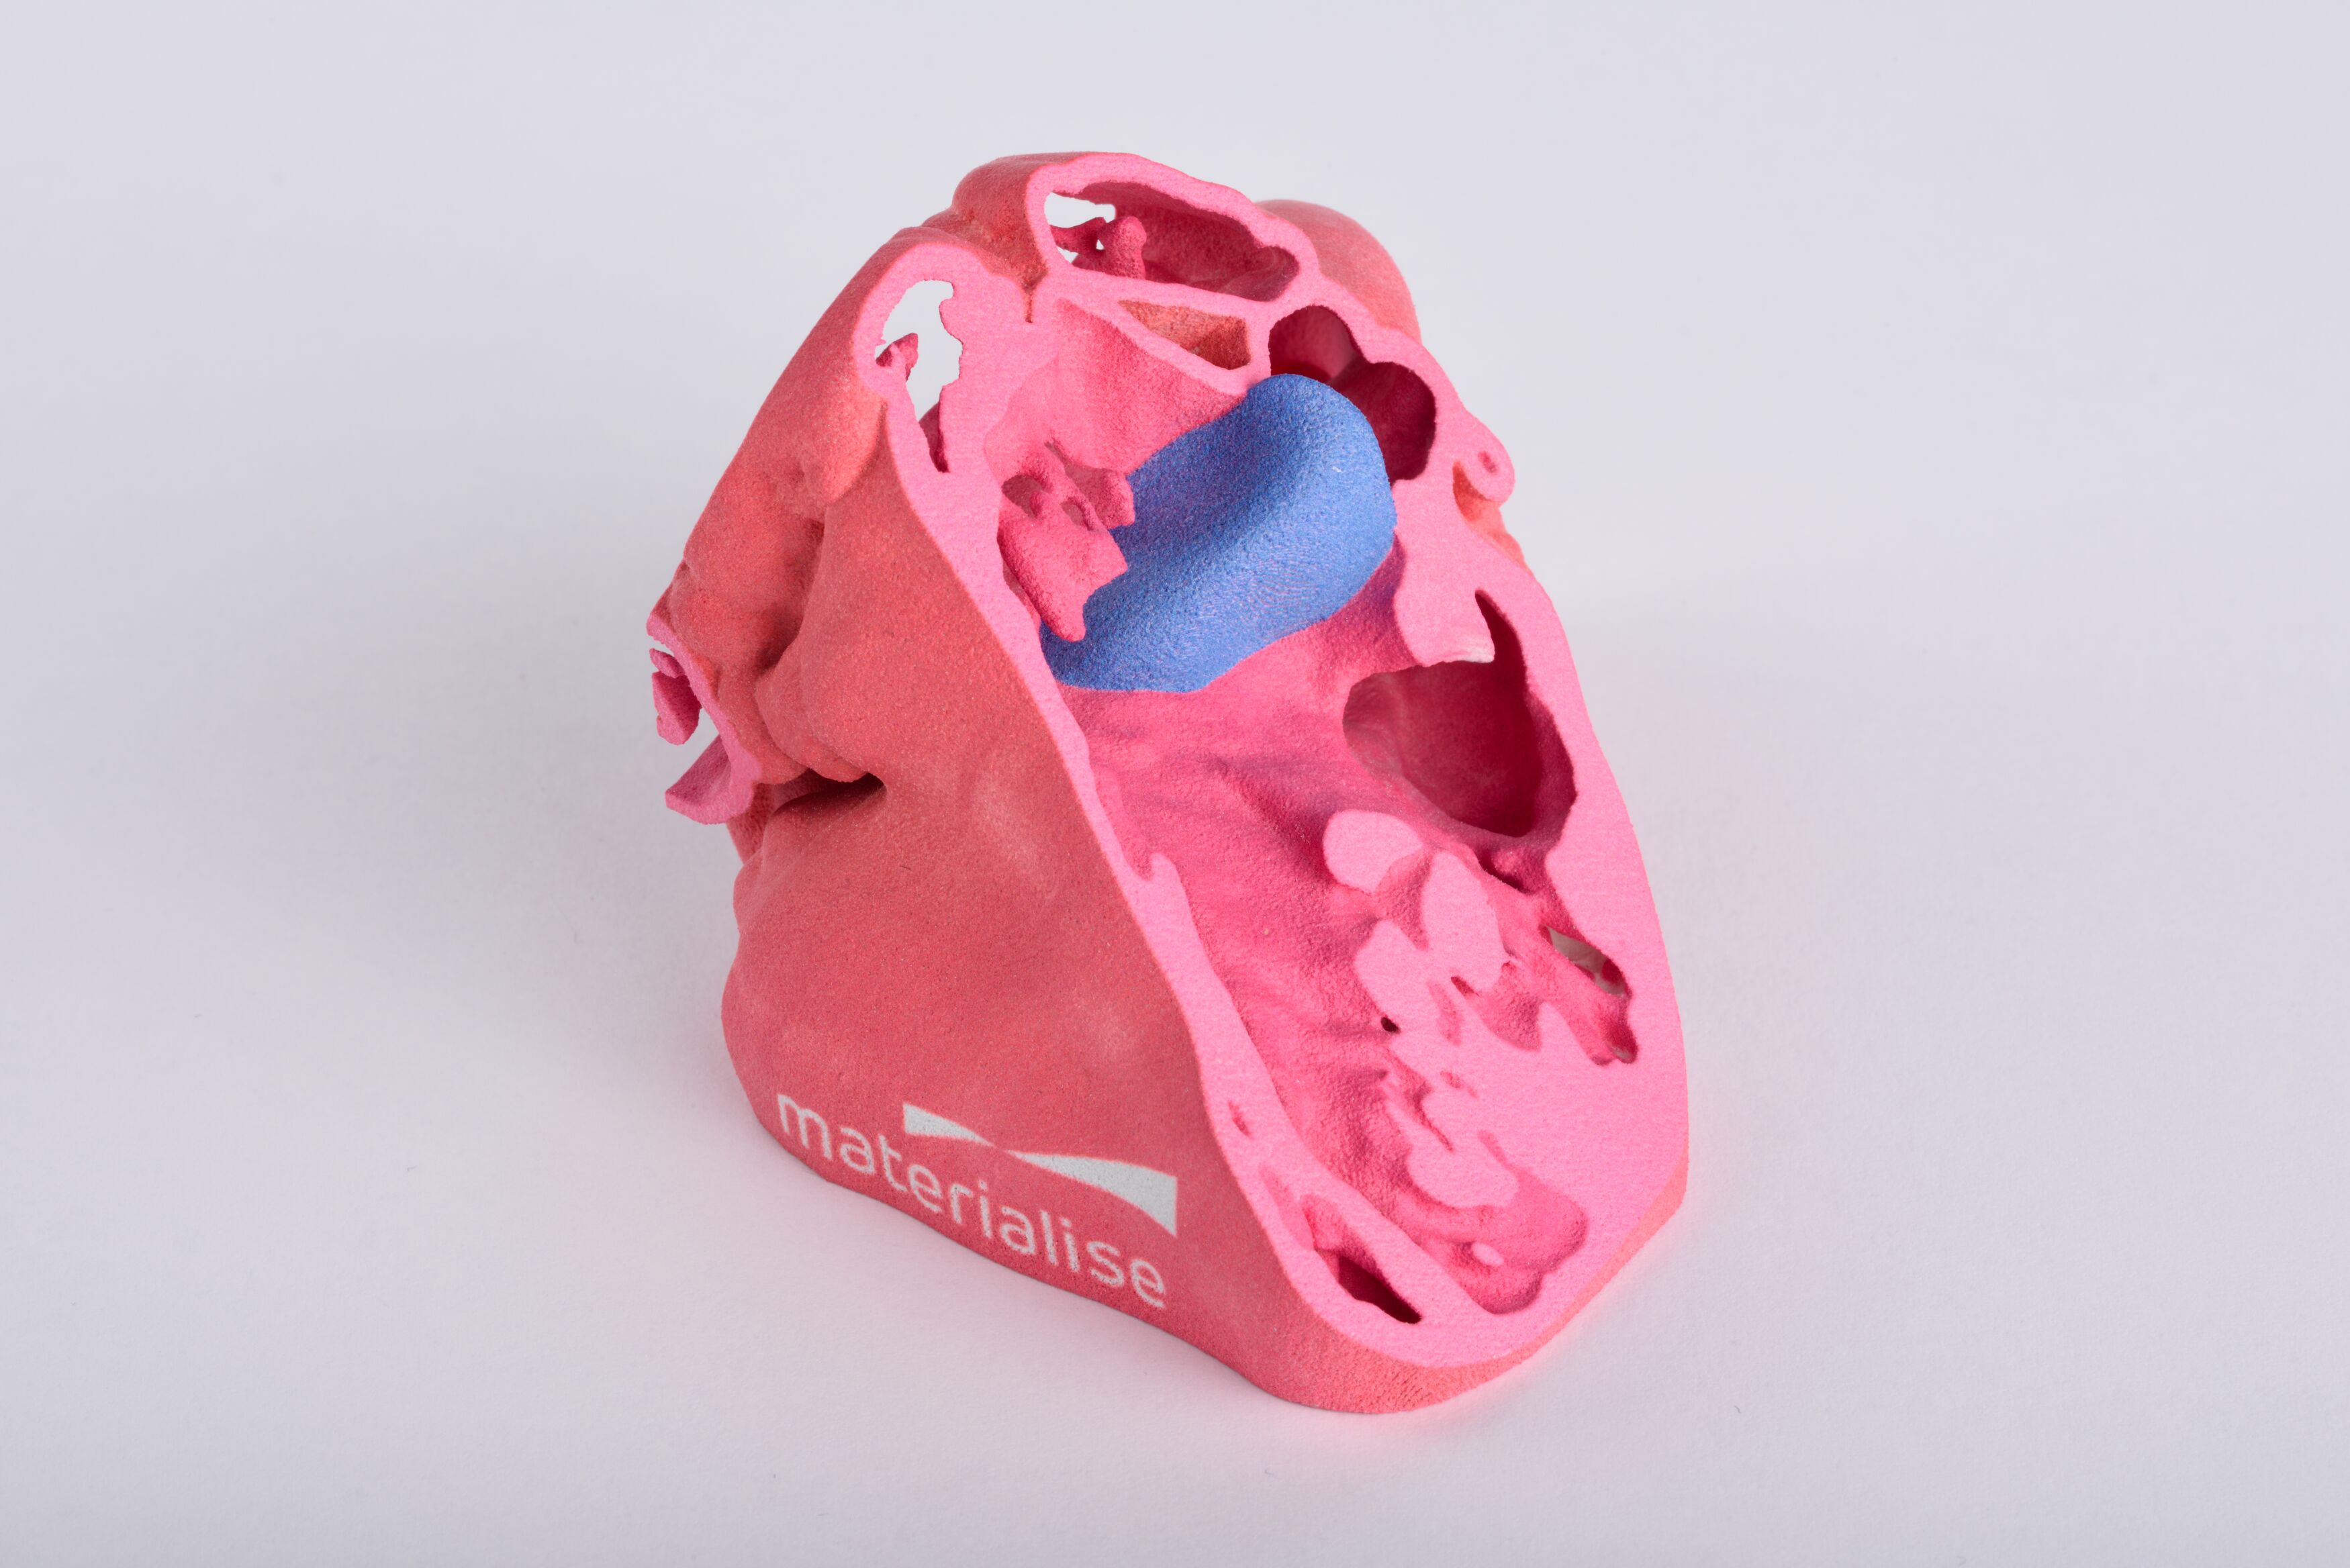 An anatomical 3D printed heart model made by Materialise and HP. Photo via Materialise.